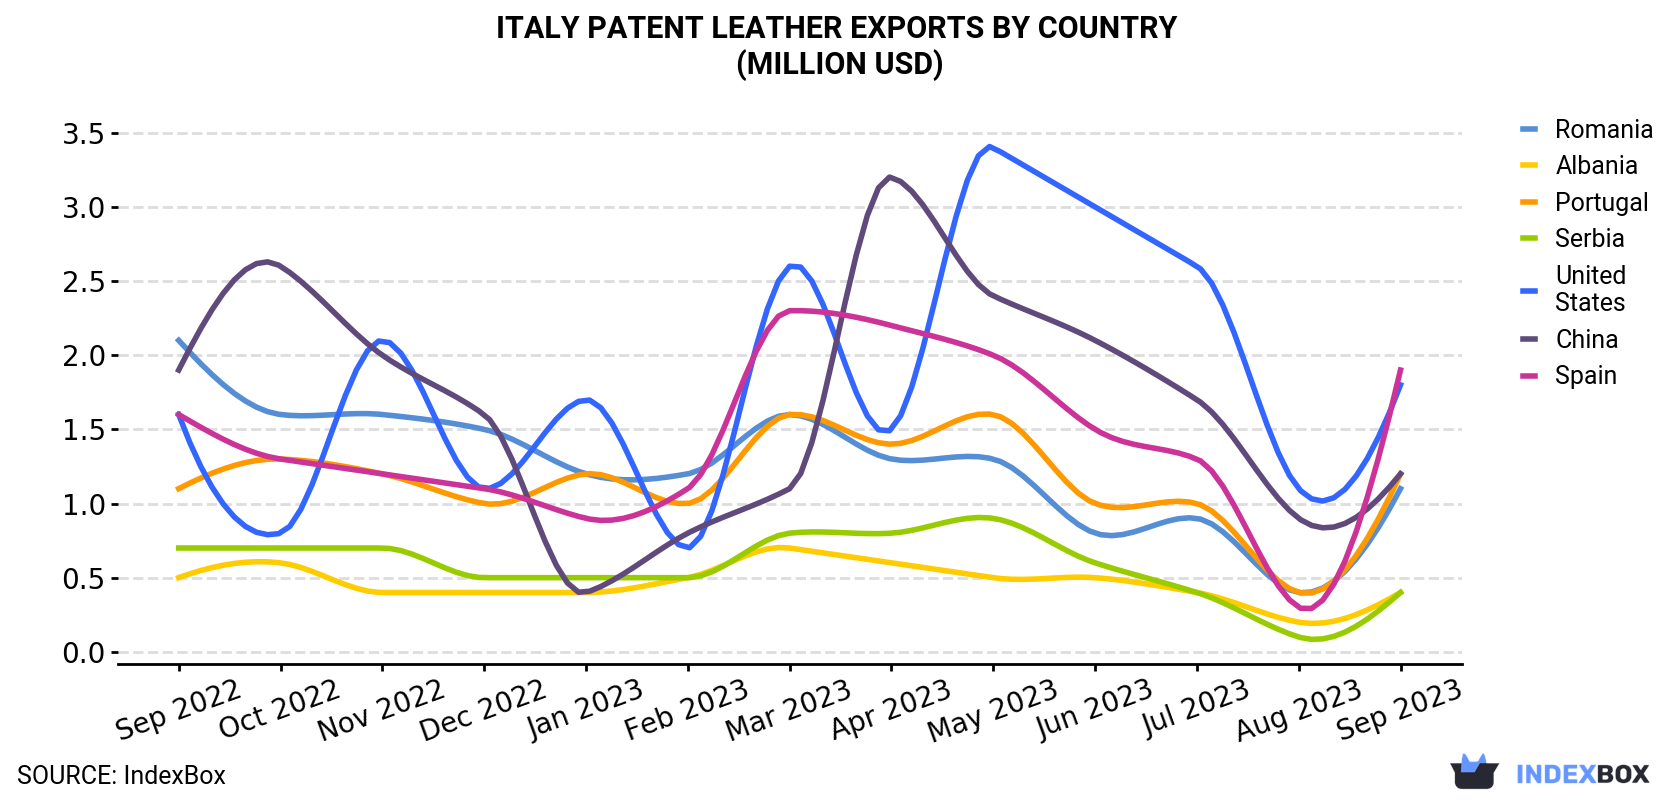 Italy Patent Leather Exports By Country (Million USD)